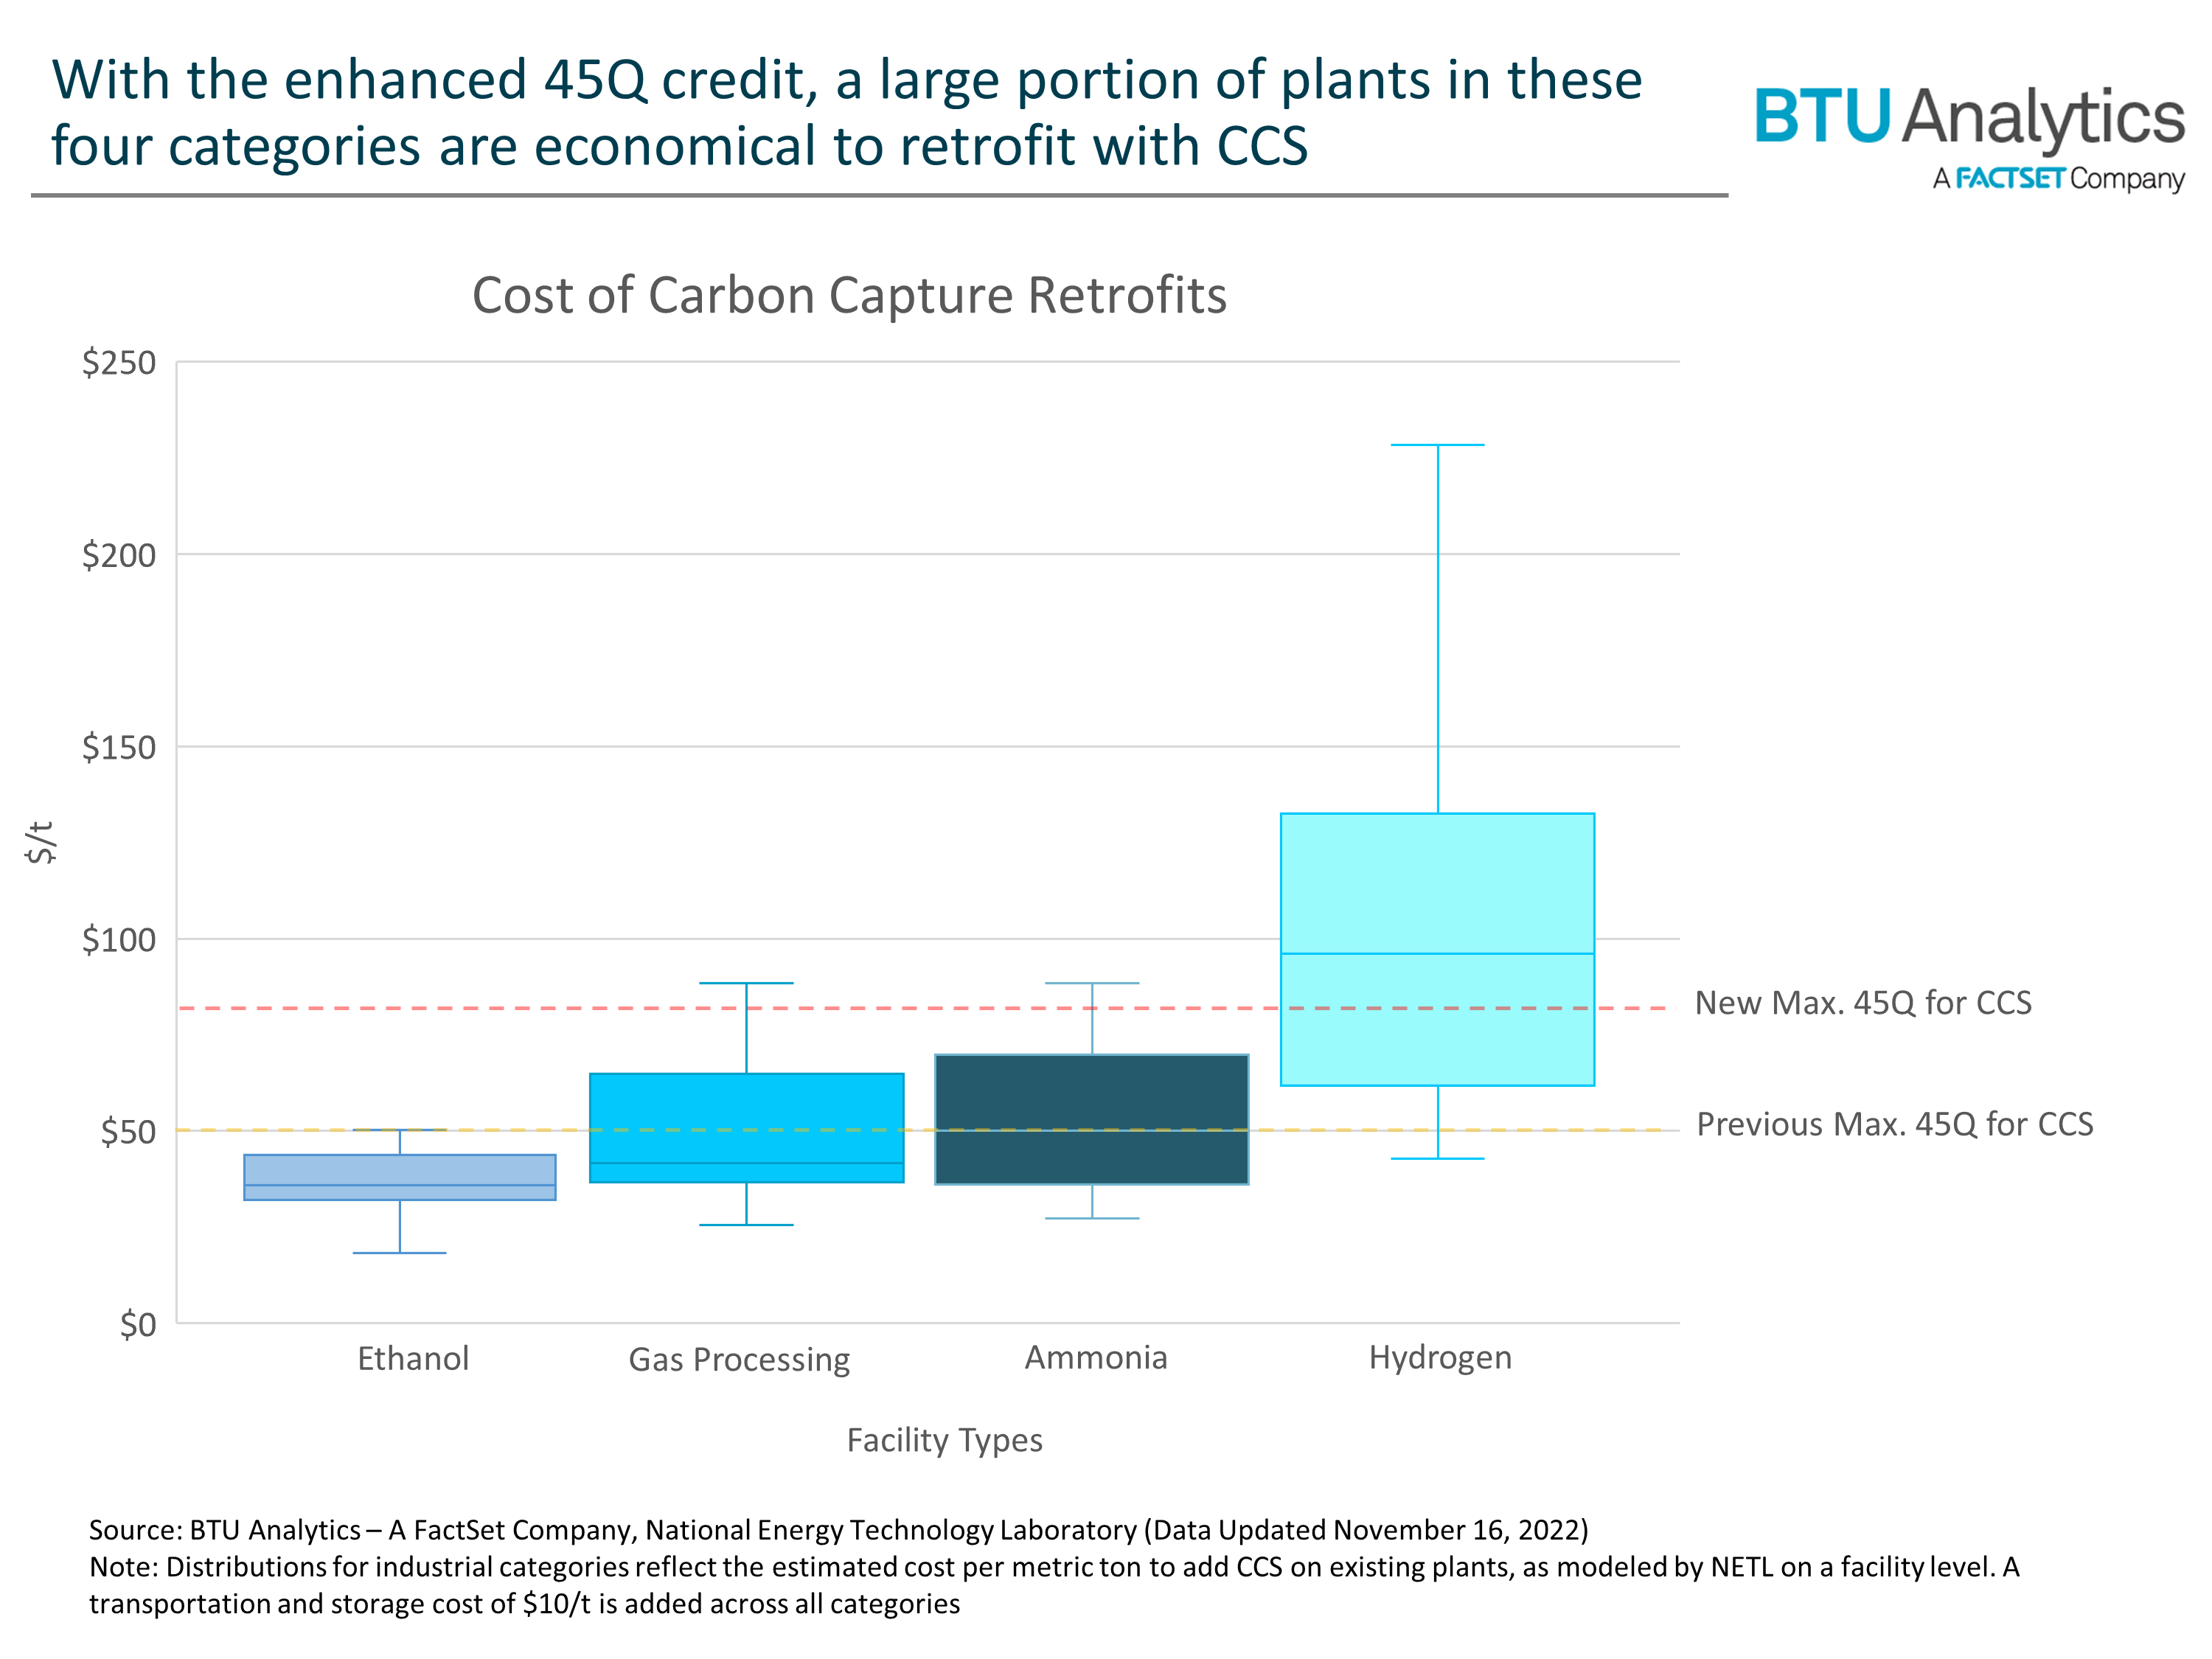 cost-of-carbon-capture-retrofits-by-industry